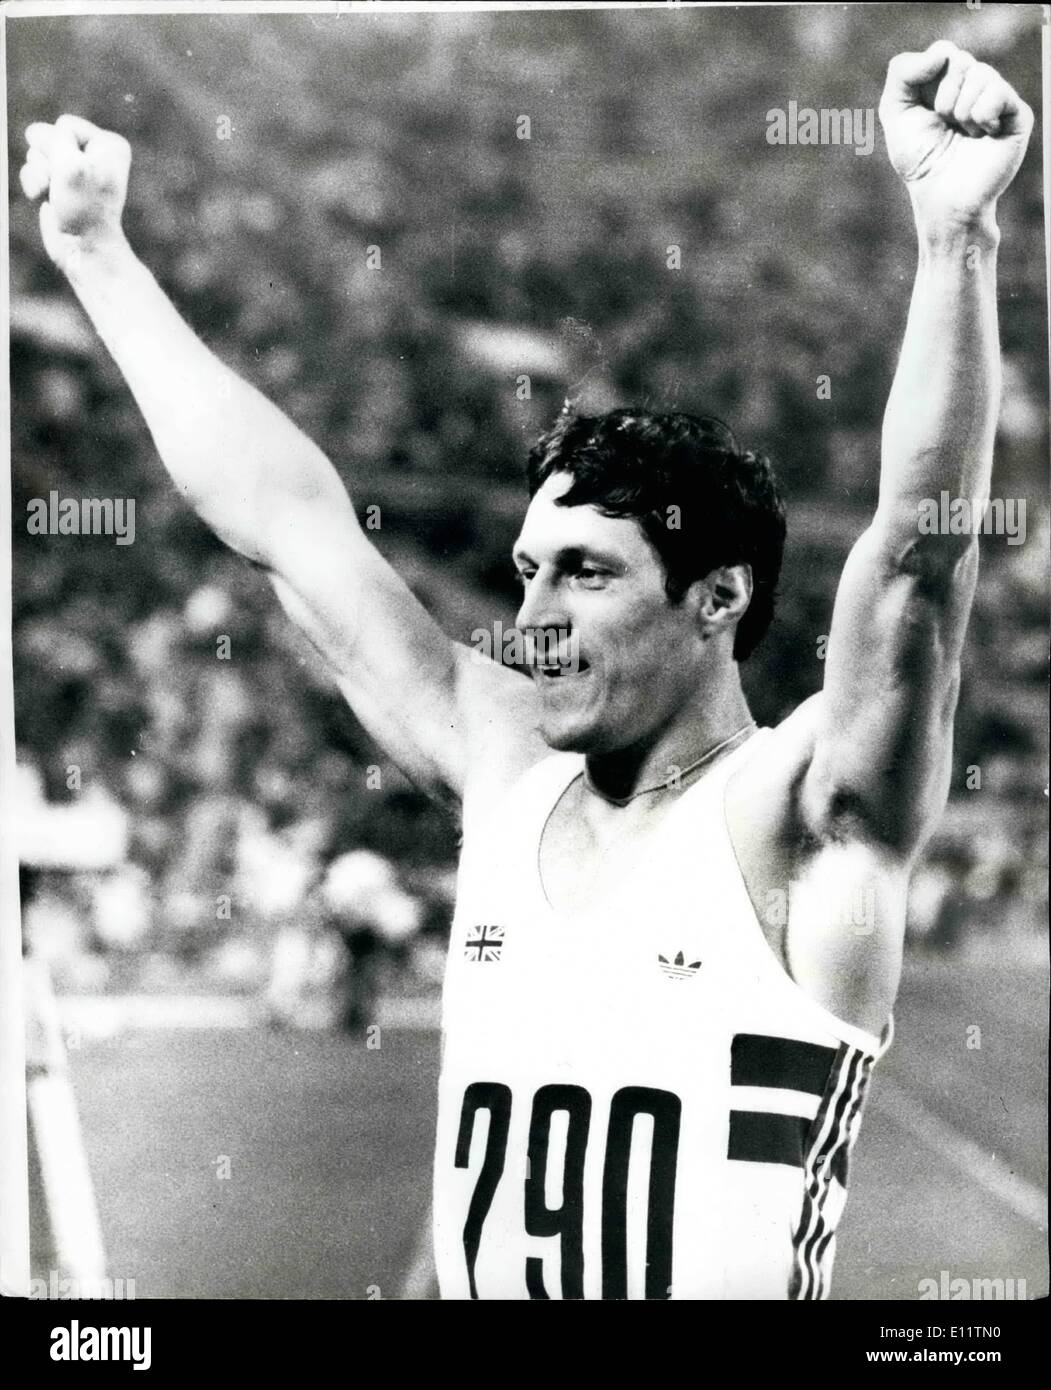 Jul. 07, 1980 - Moscow Olympics: Alan Wells wins 100m final. Photo Shows Britain's Alan Well with his arms in the air after winning the final of the 100 metres in the 10.25. Stock Photo